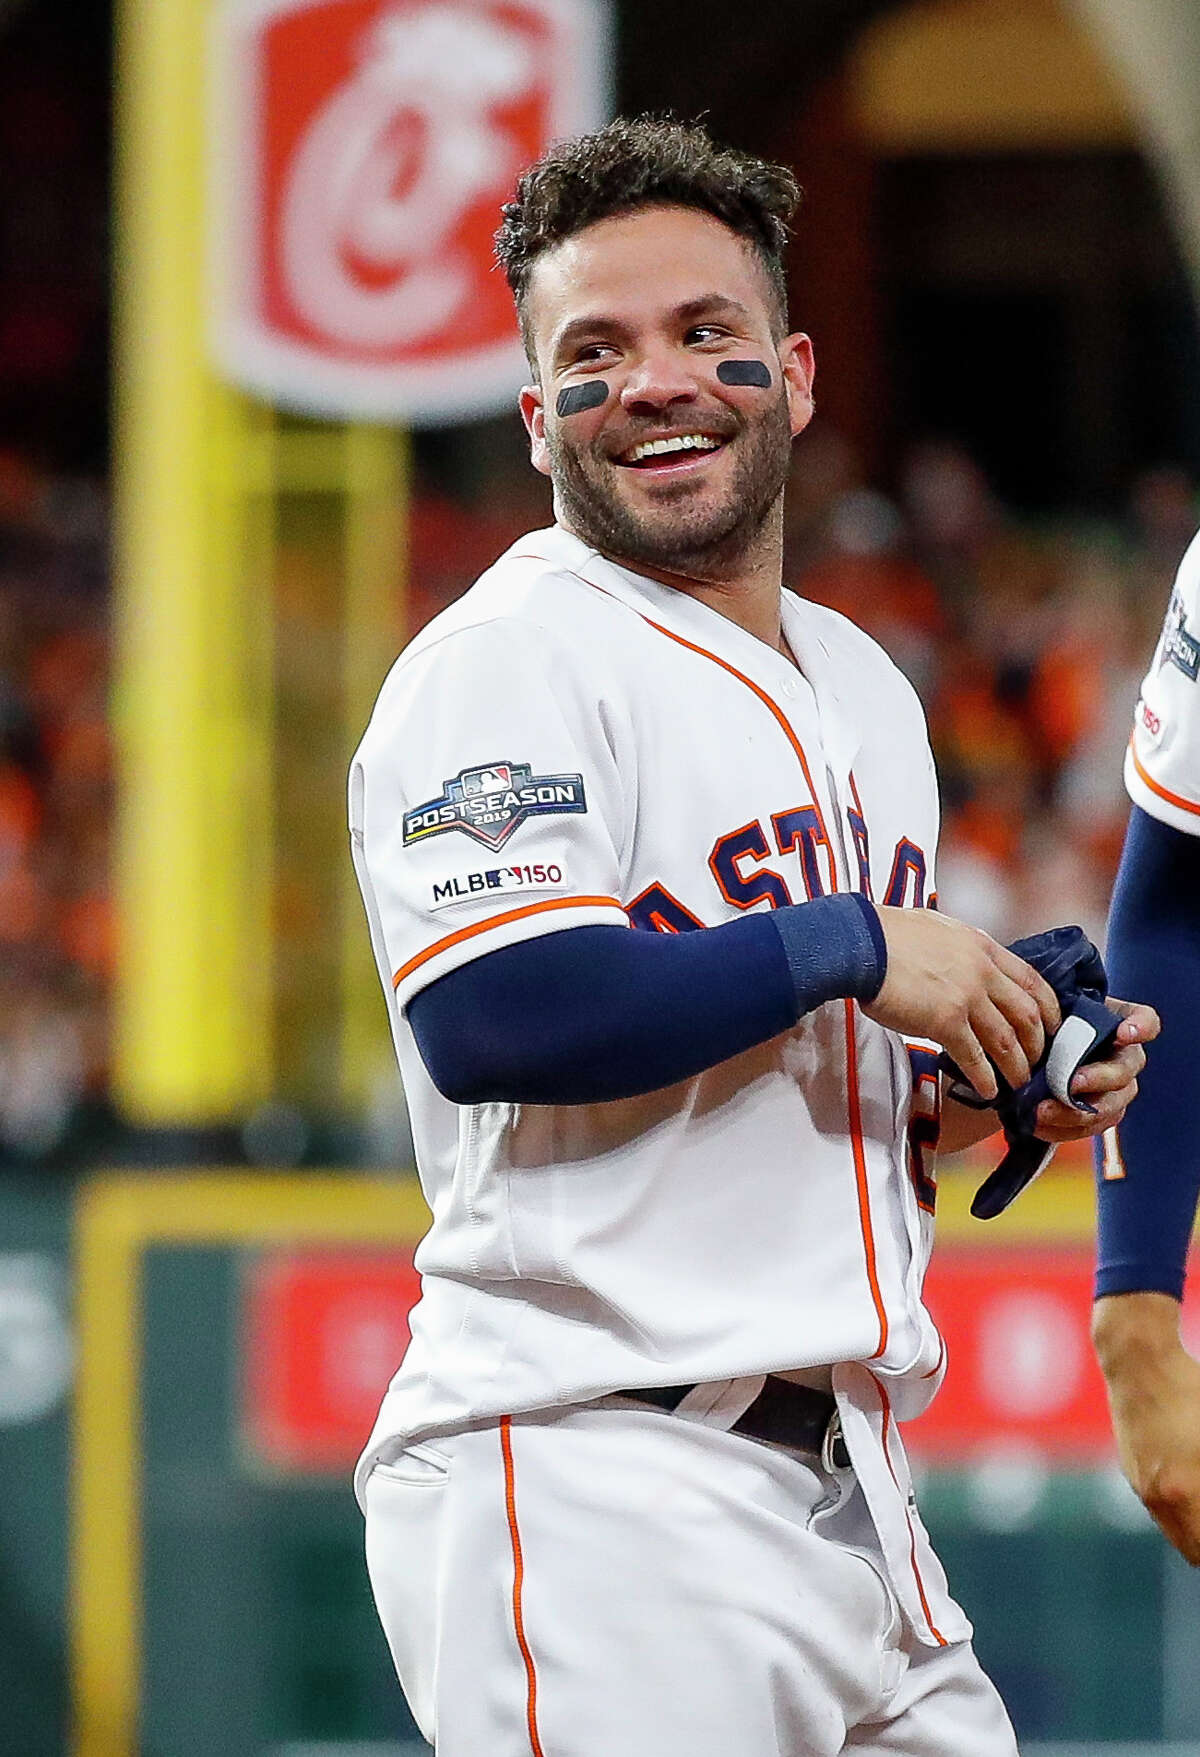 'Lead the way. Be a role model' José Altuve wrote inspiring letter